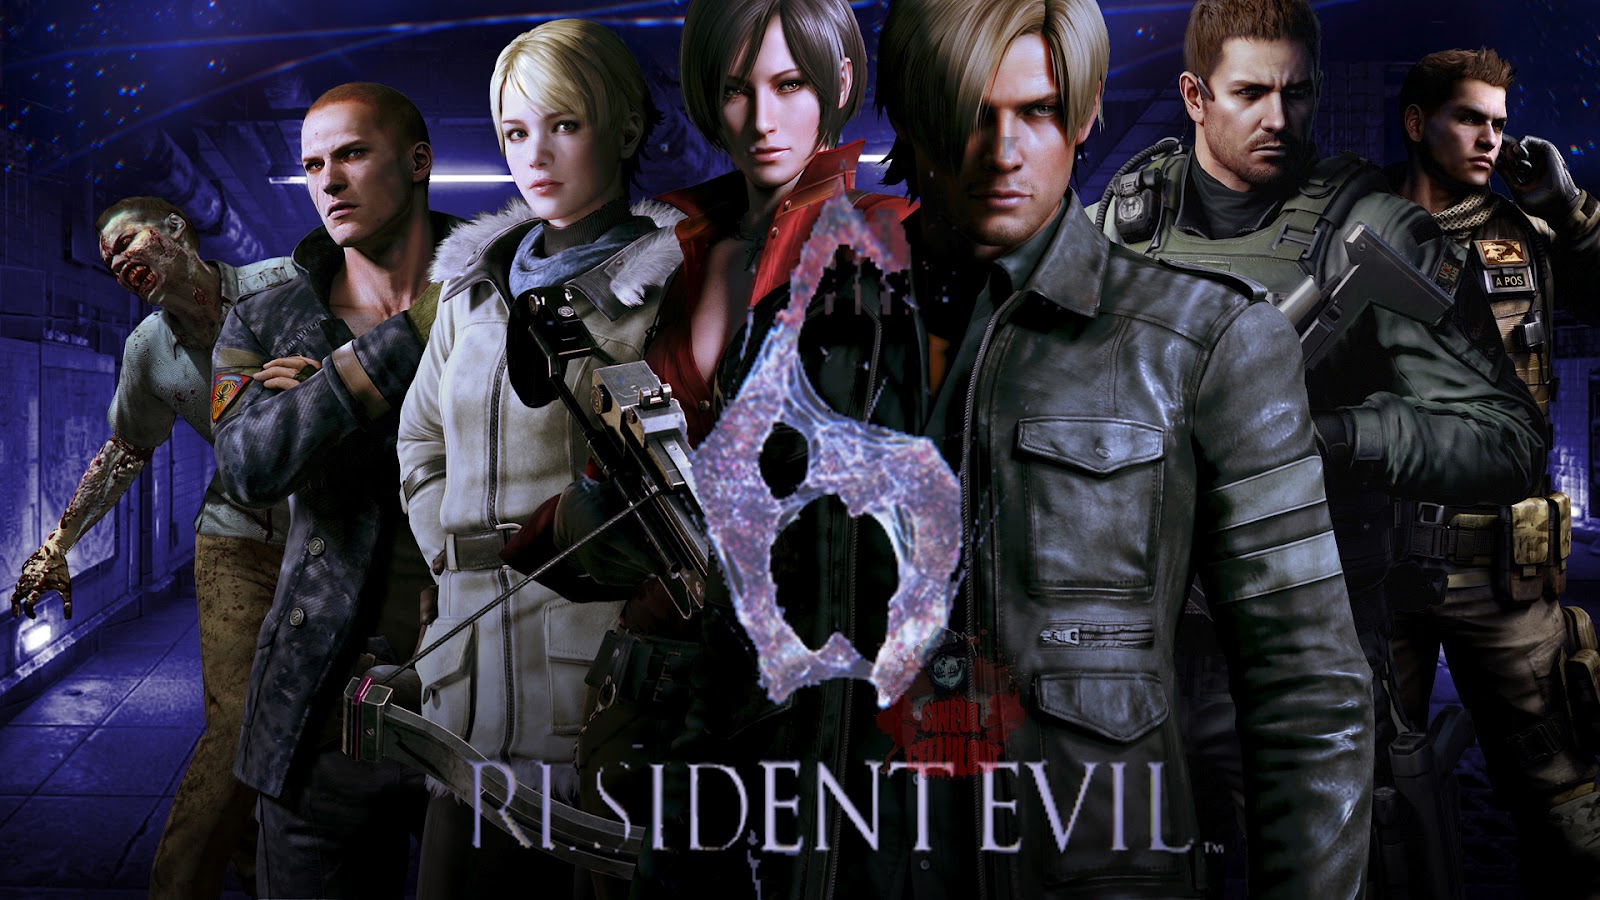 Resident Evil 6 Pc Game Download Full Version 100% working